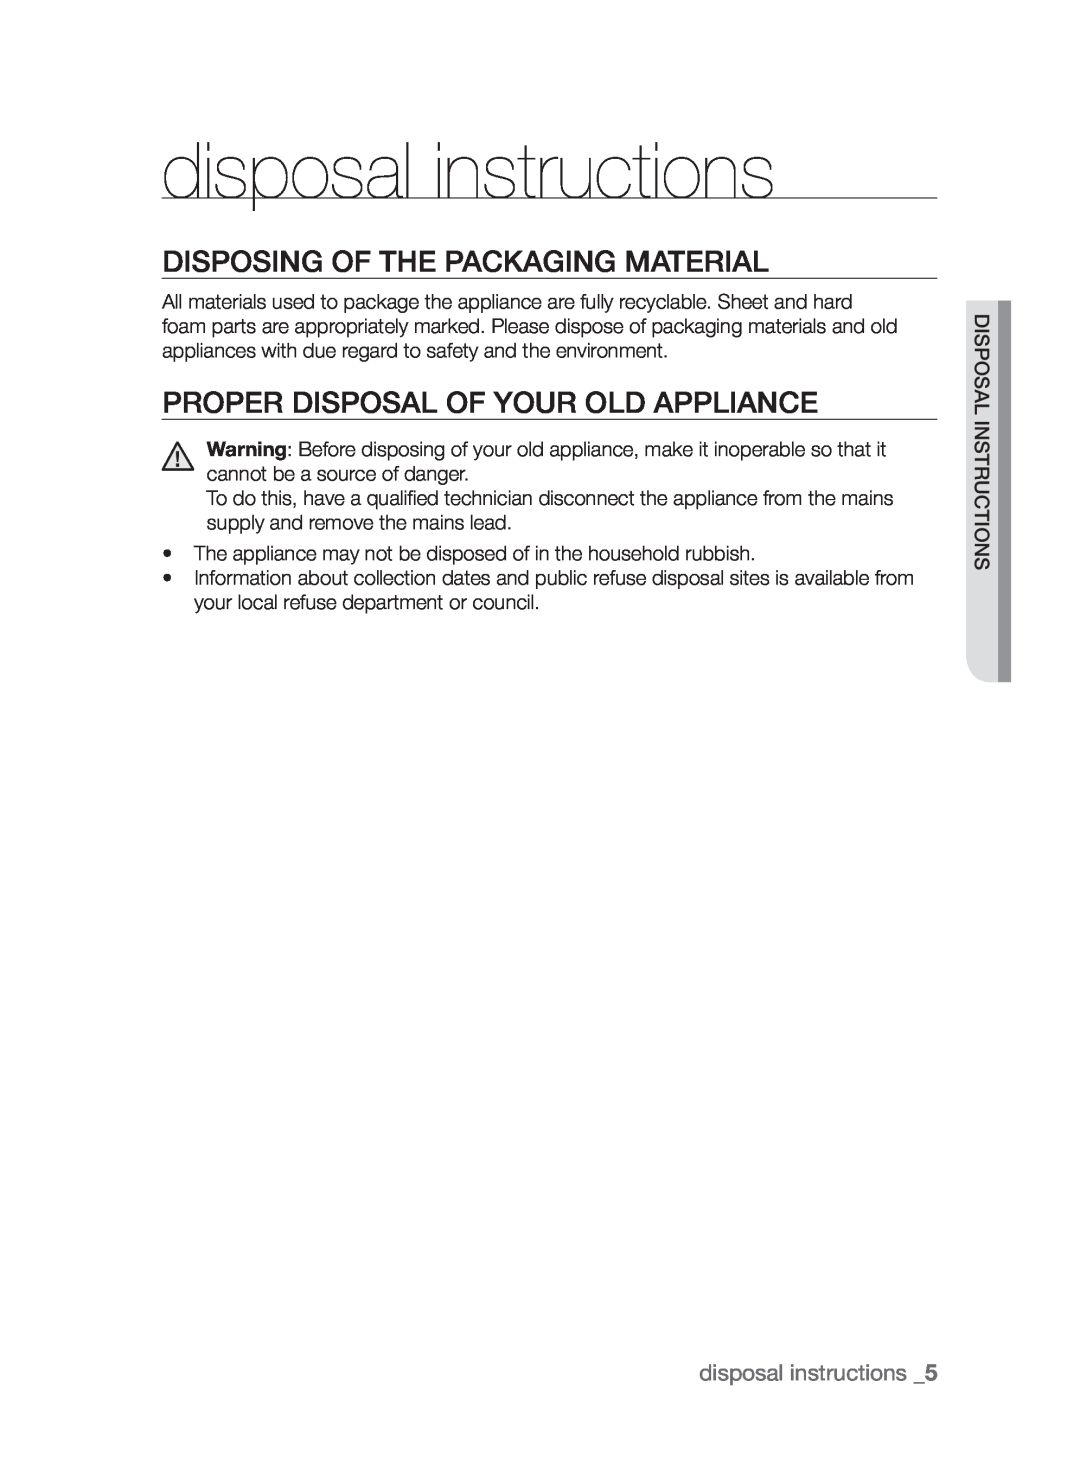 Samsung CTI613GI disposal instructions, Disposing of the packaging material, Proper disposal of your old appliance 